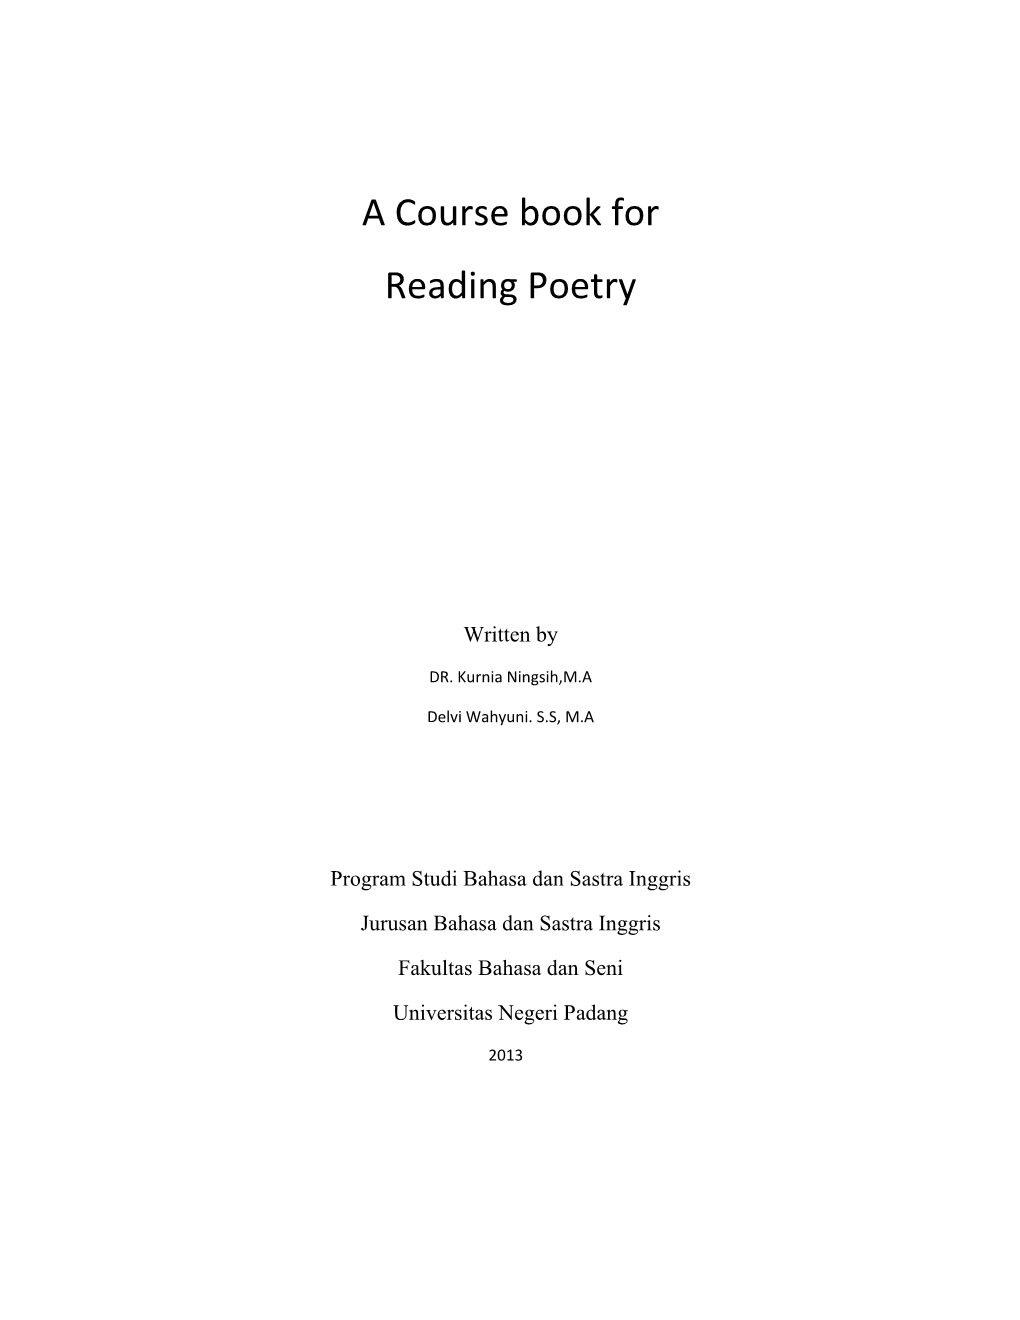 A Course Book for Reading Poetry